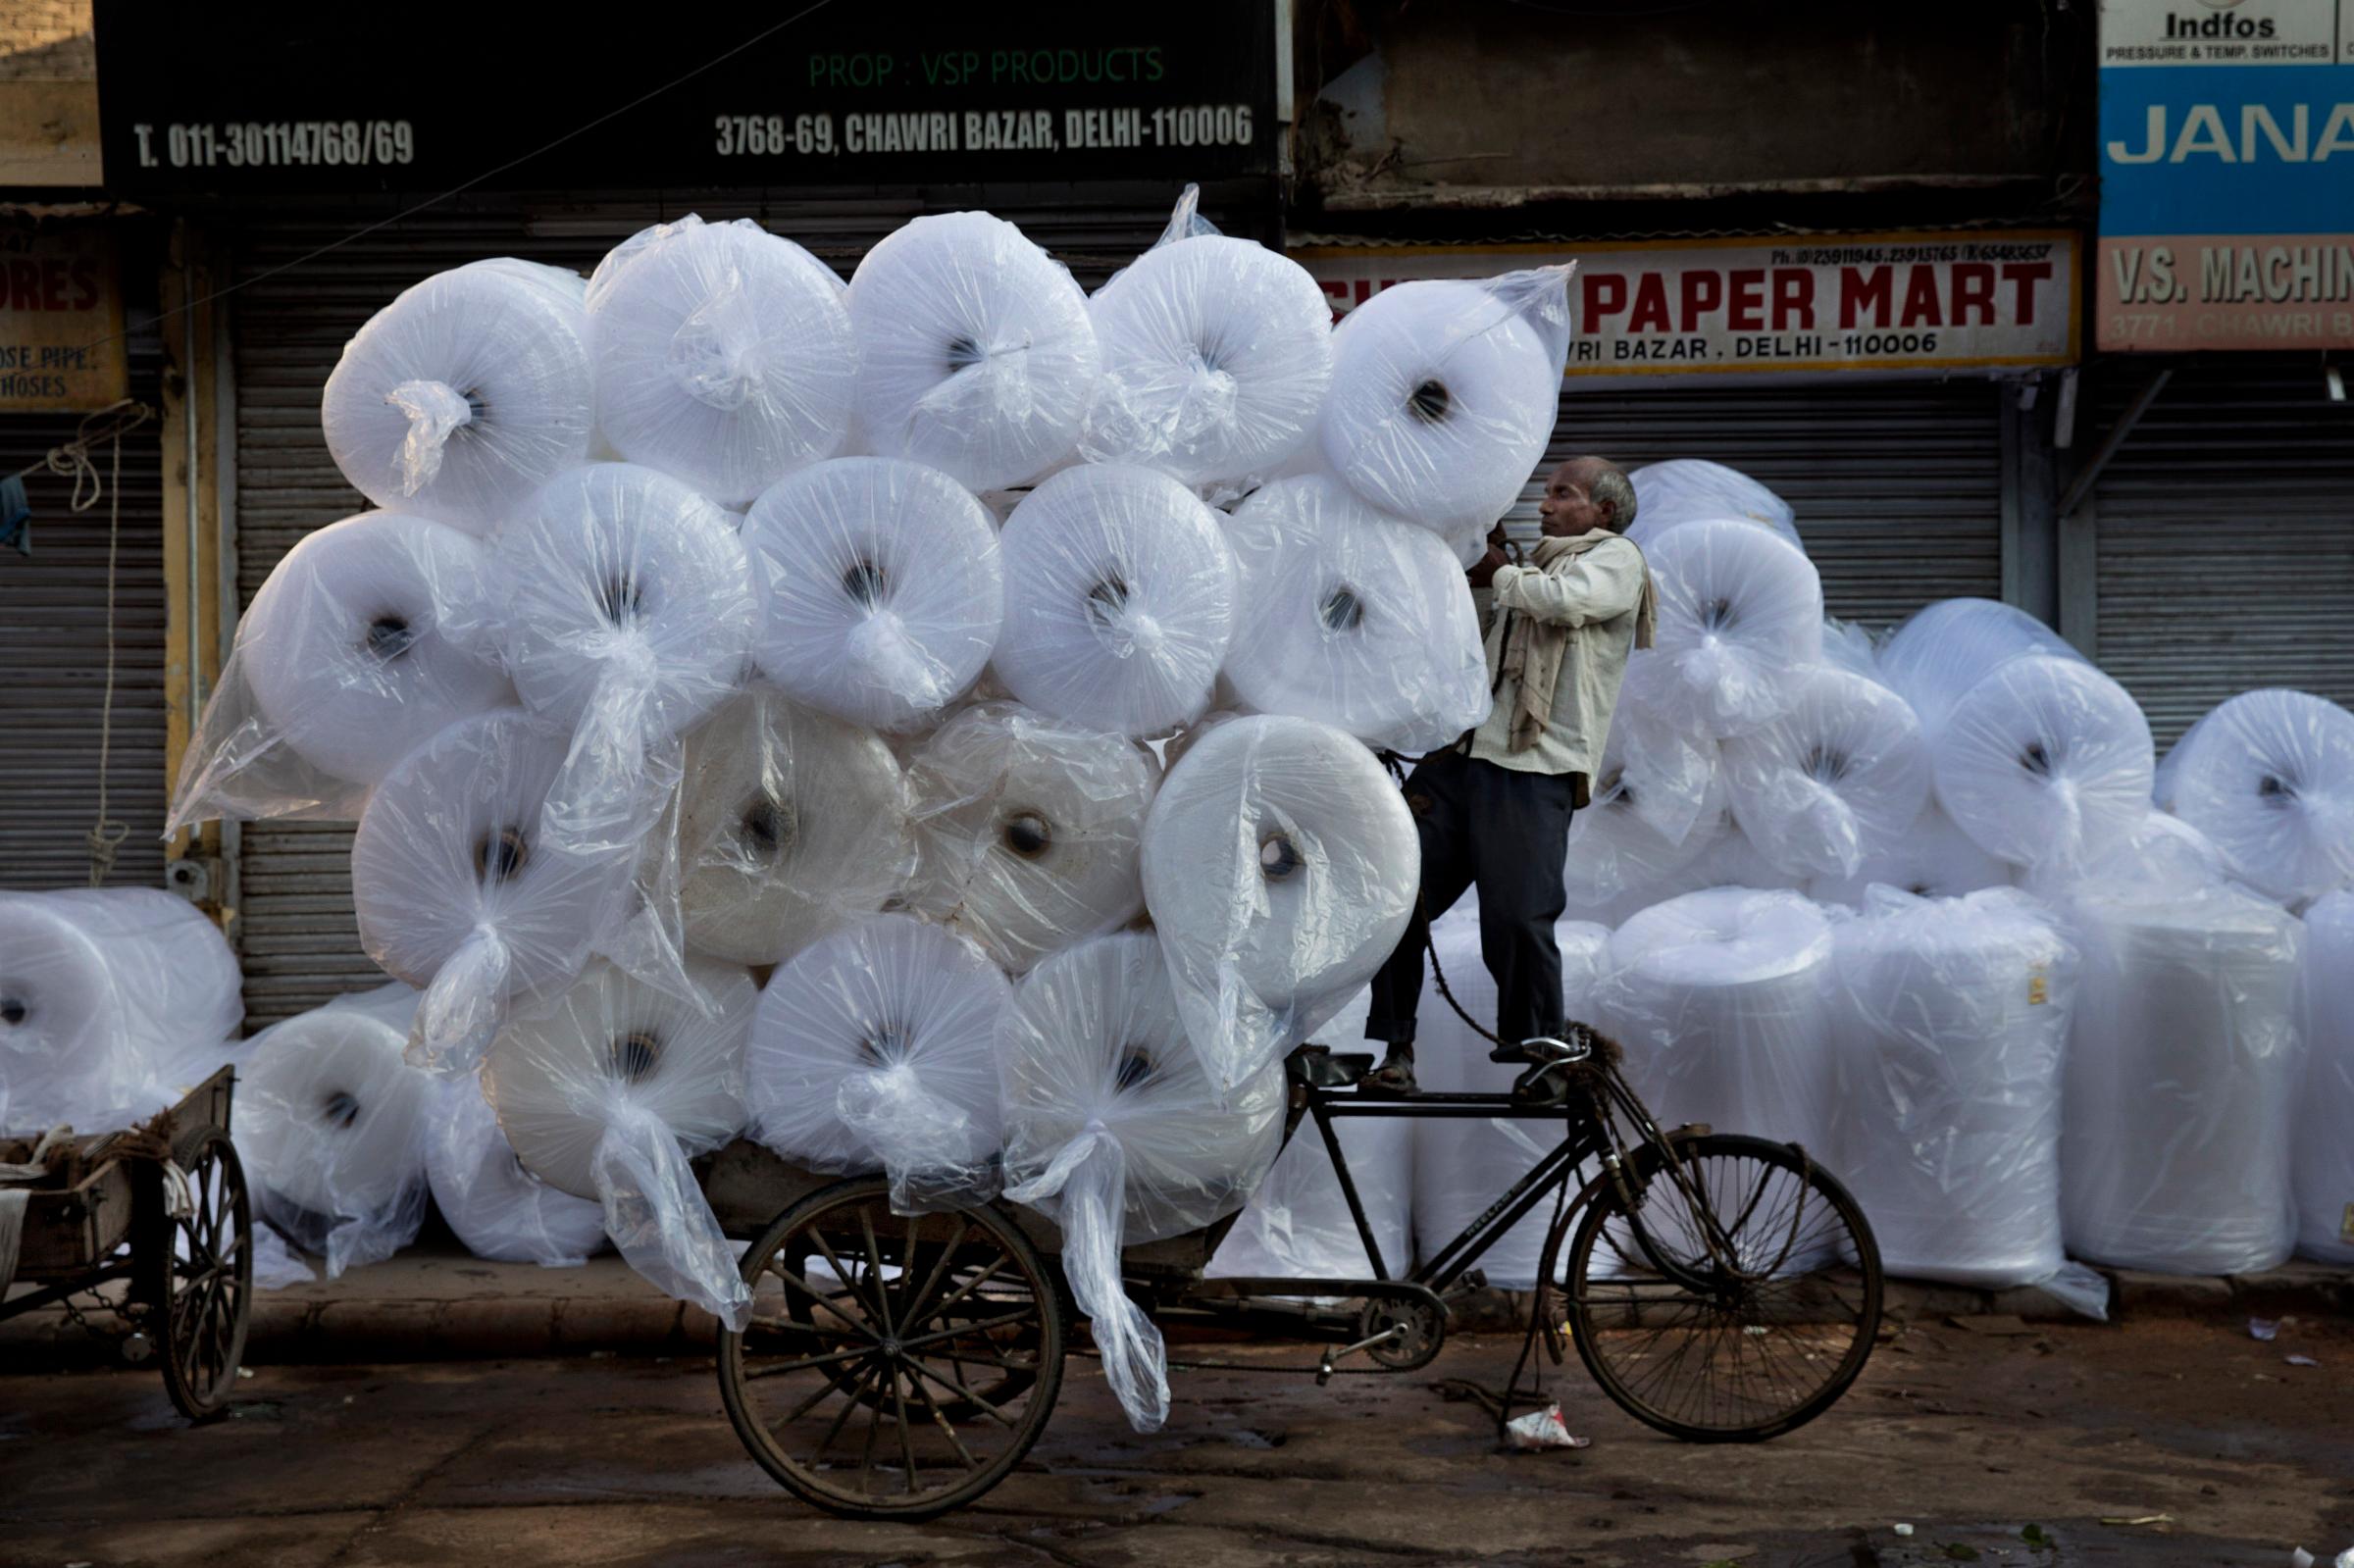 An Indian laborer loads goods on a bike at Chawri Bazar, in New Delhi on Sept. 1, 2014.